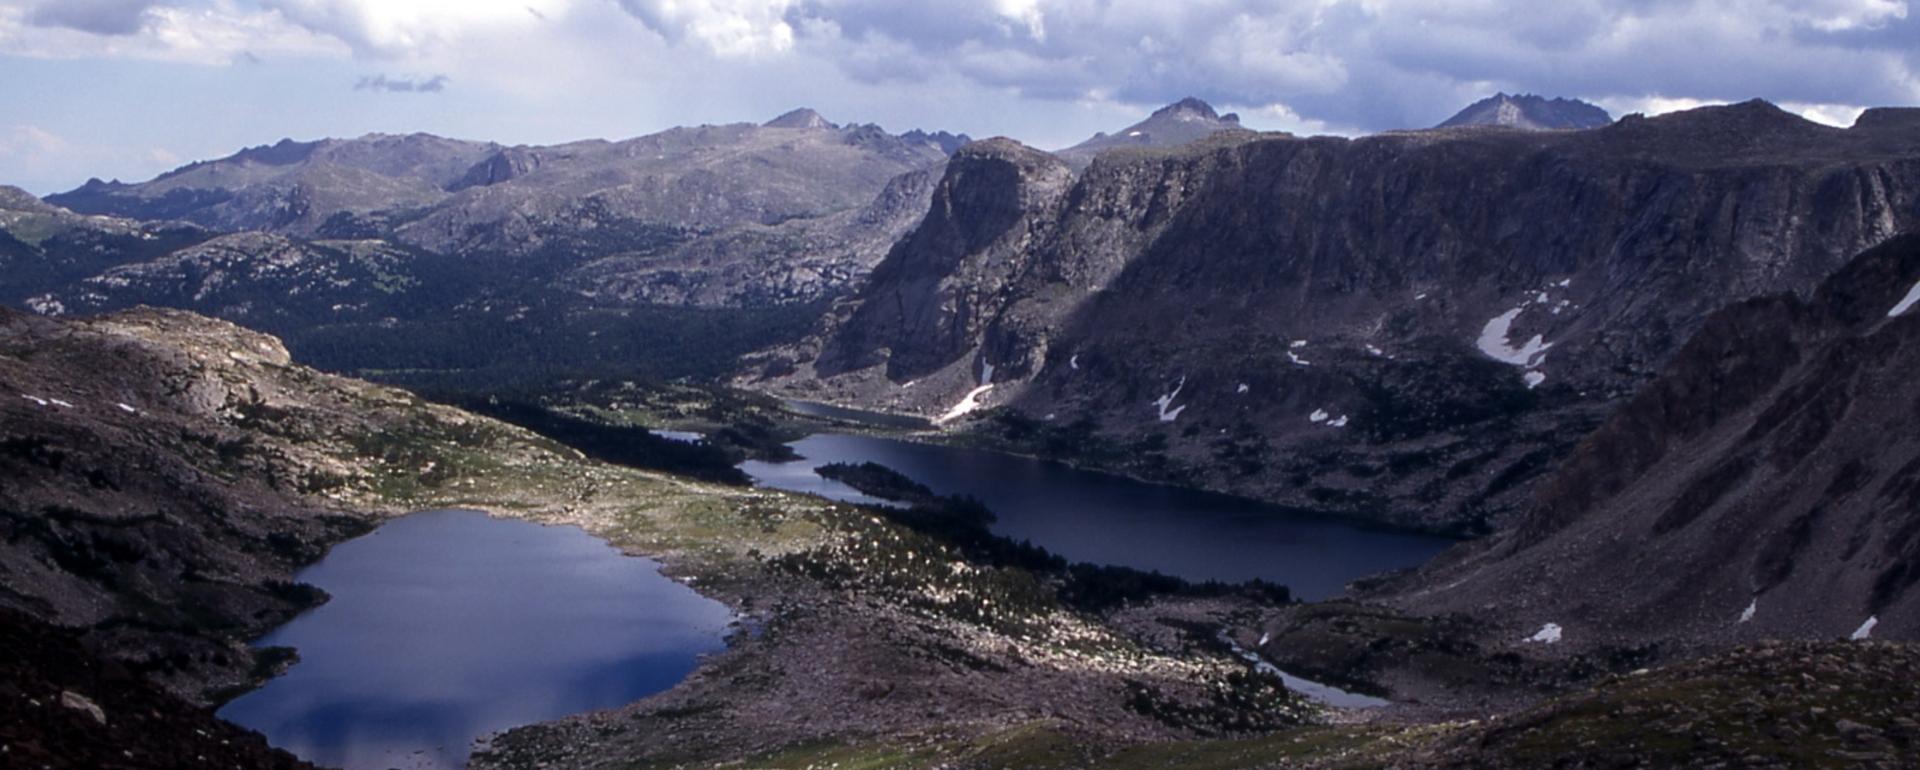 Macon & Washakie Lakes, Wind River Range, Popo Agie Wilderness on the Shoshone National Forest, Wyoming. Photo by Jim Peaco, courtesy National Park Service